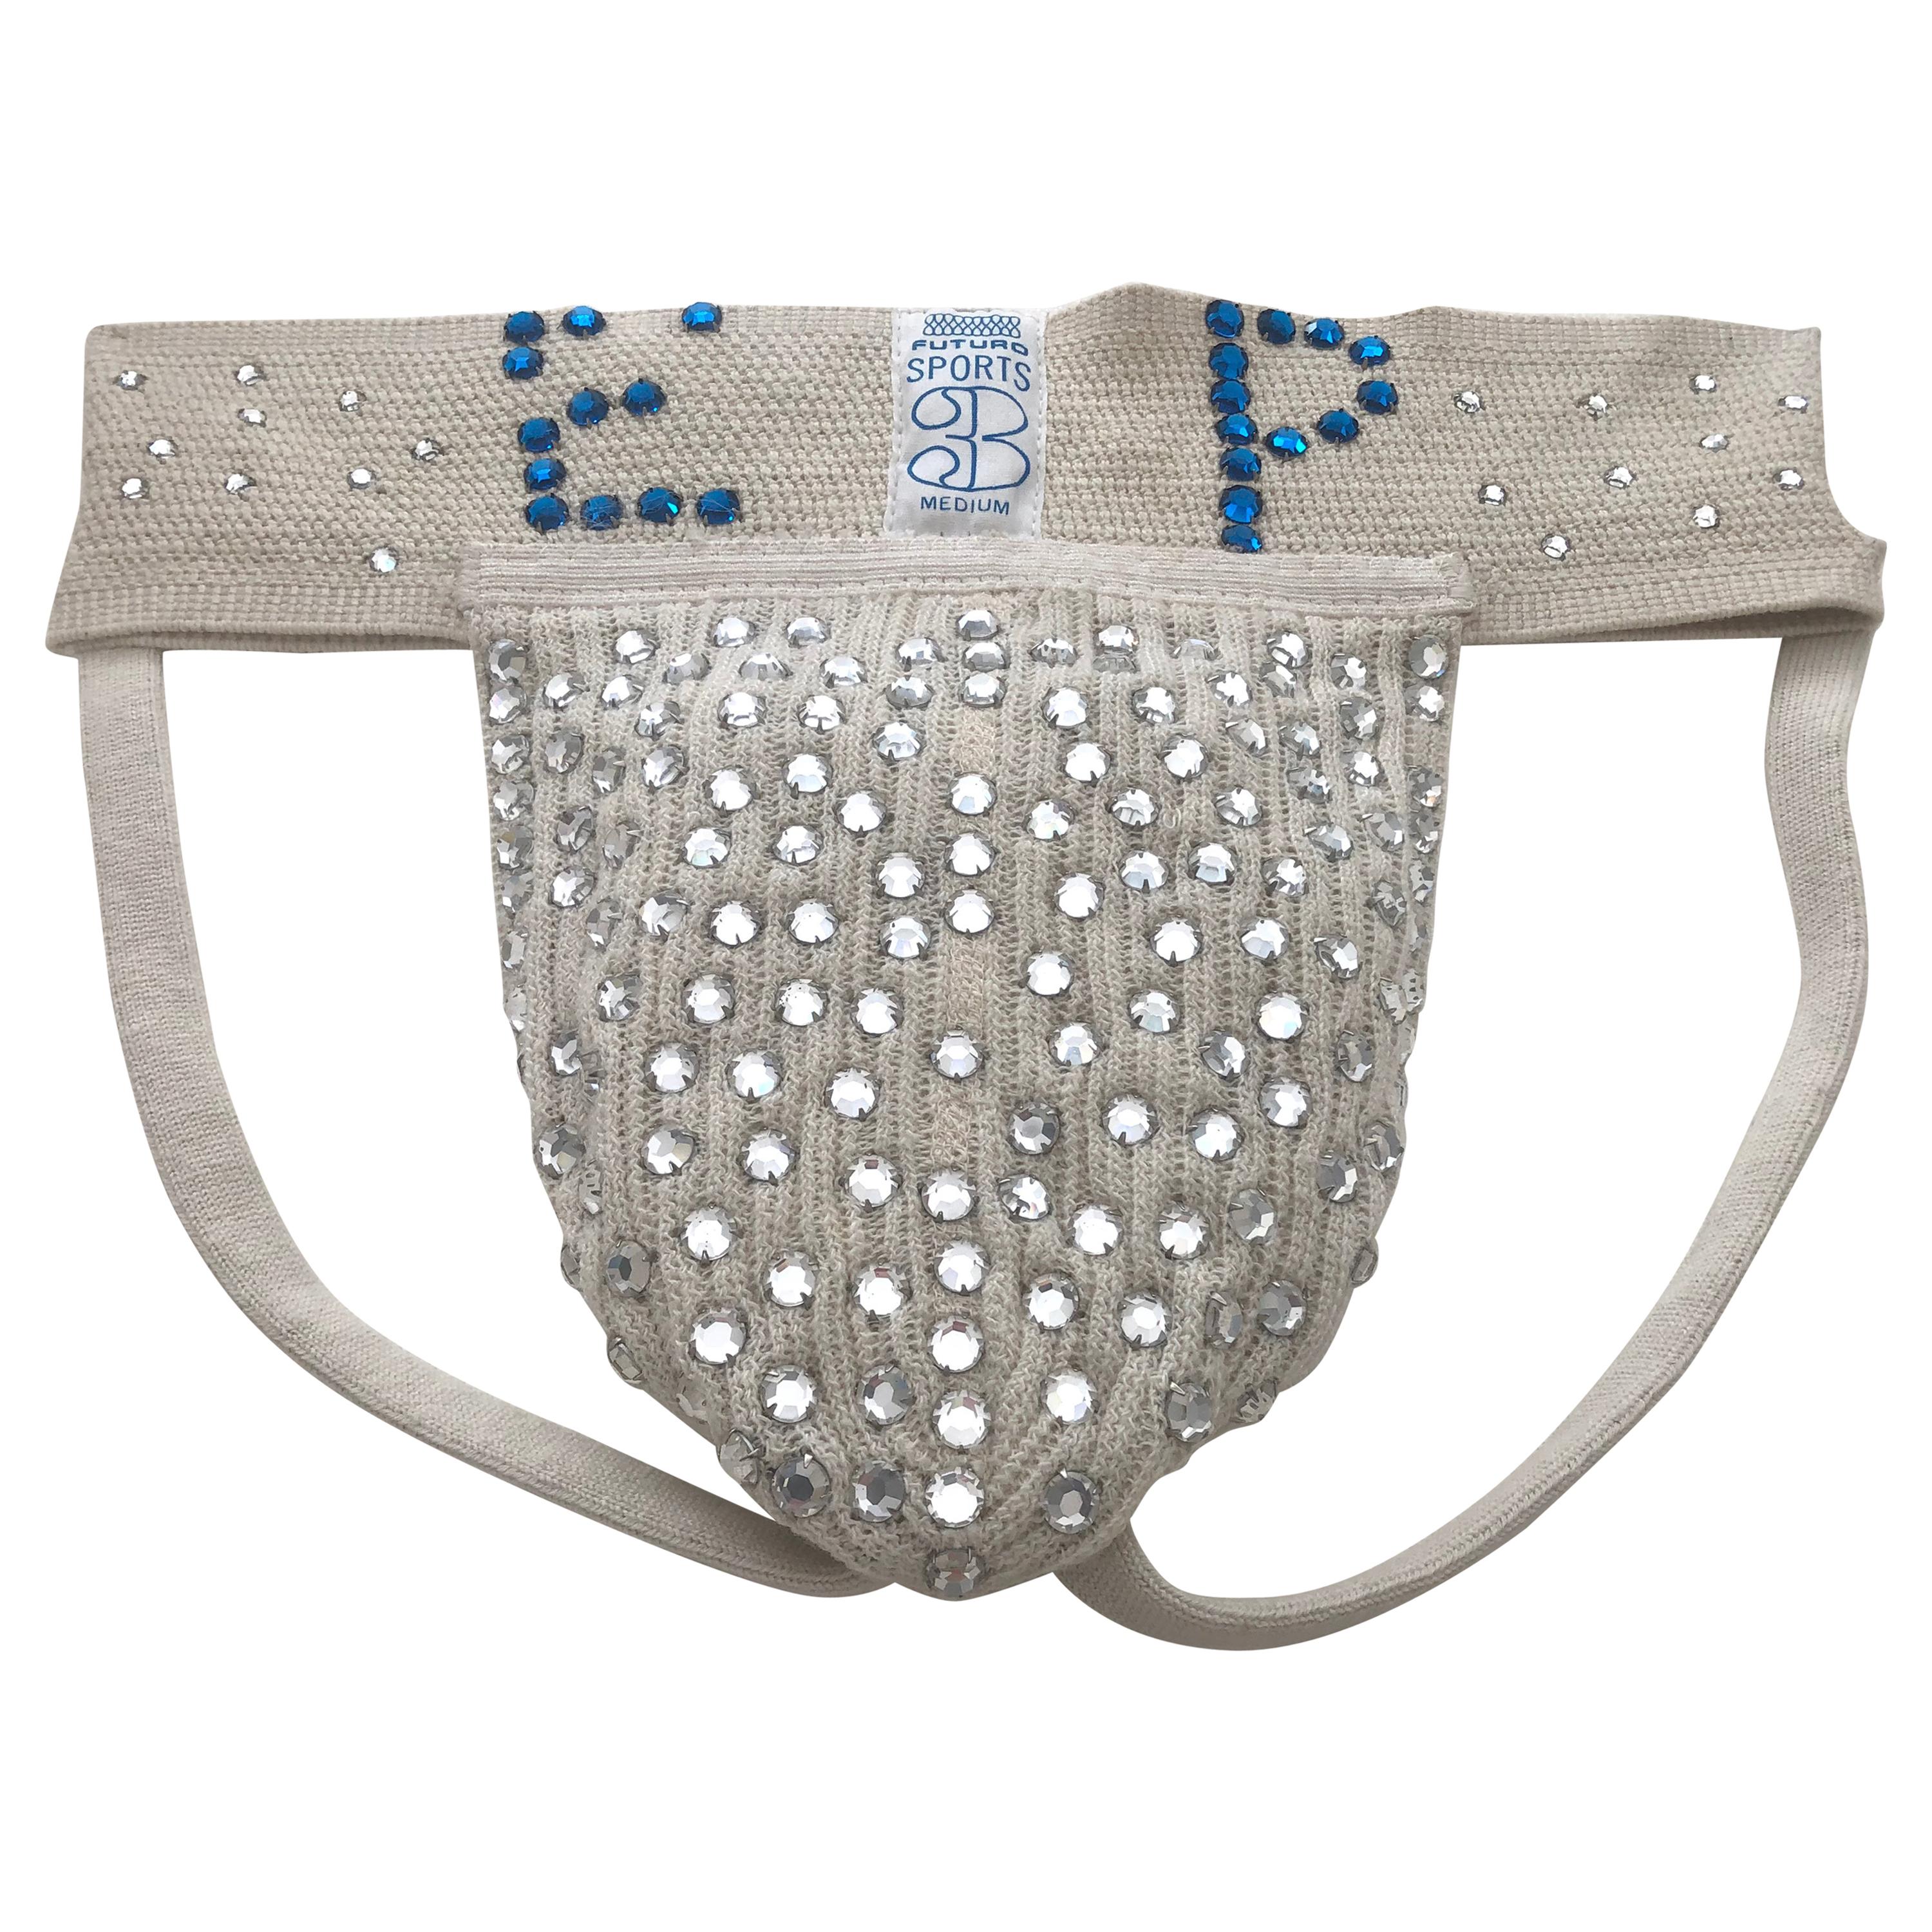 Elvis Presley's Jockstrap with Certificate of Authenticity  For Sale